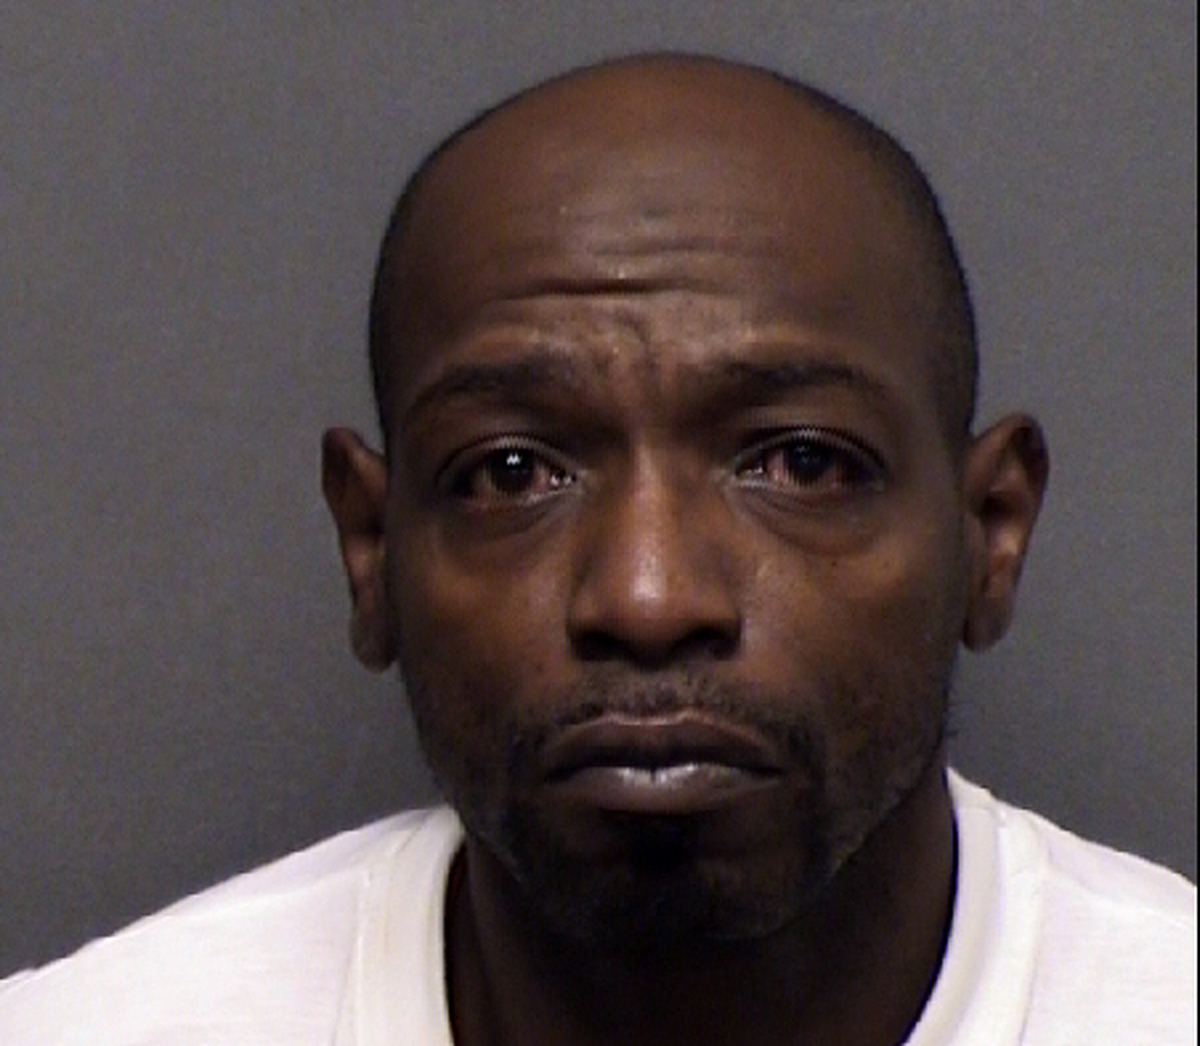 Deundray Thomas, 42, was charged with murder in connection with a fatal shooting outside an East Side motel on Dec. 31.